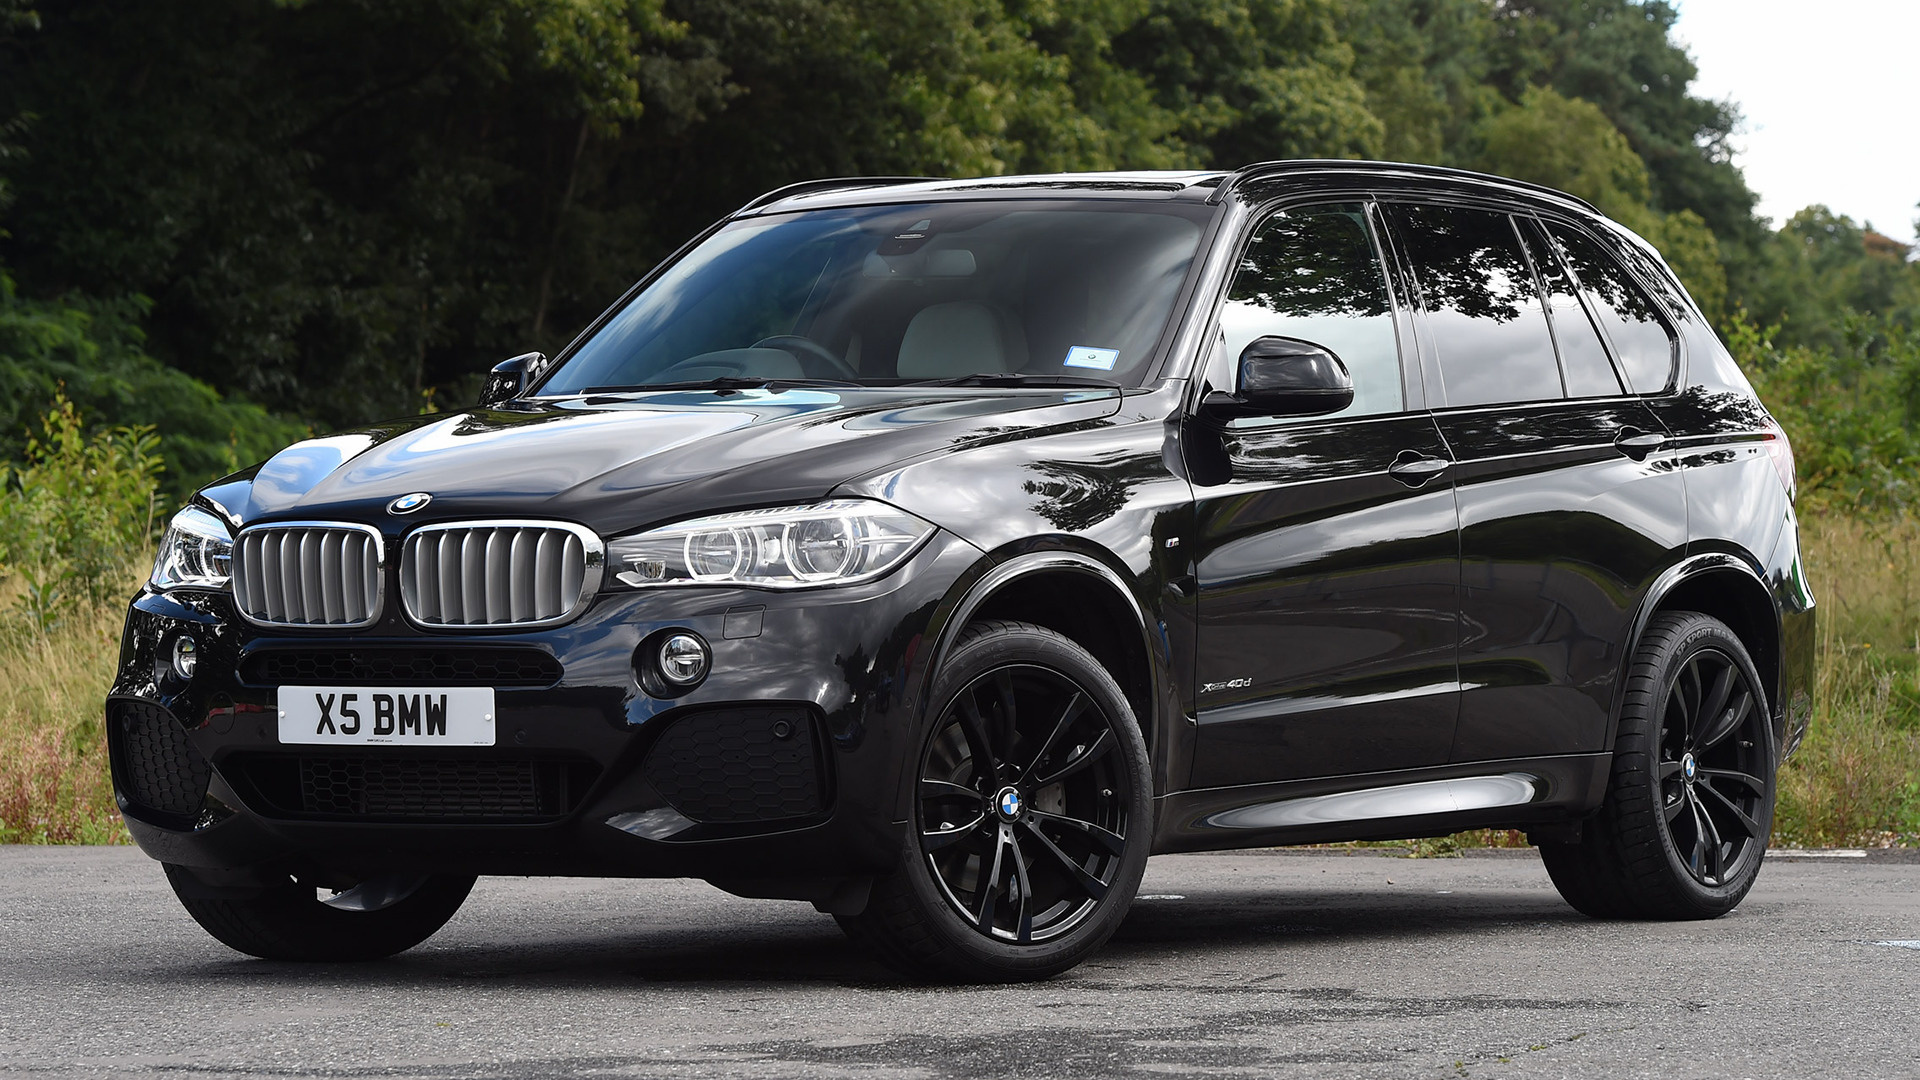 2013 BMW X5 M Sport (UK) - Wallpapers and HD Images | Car Pixel